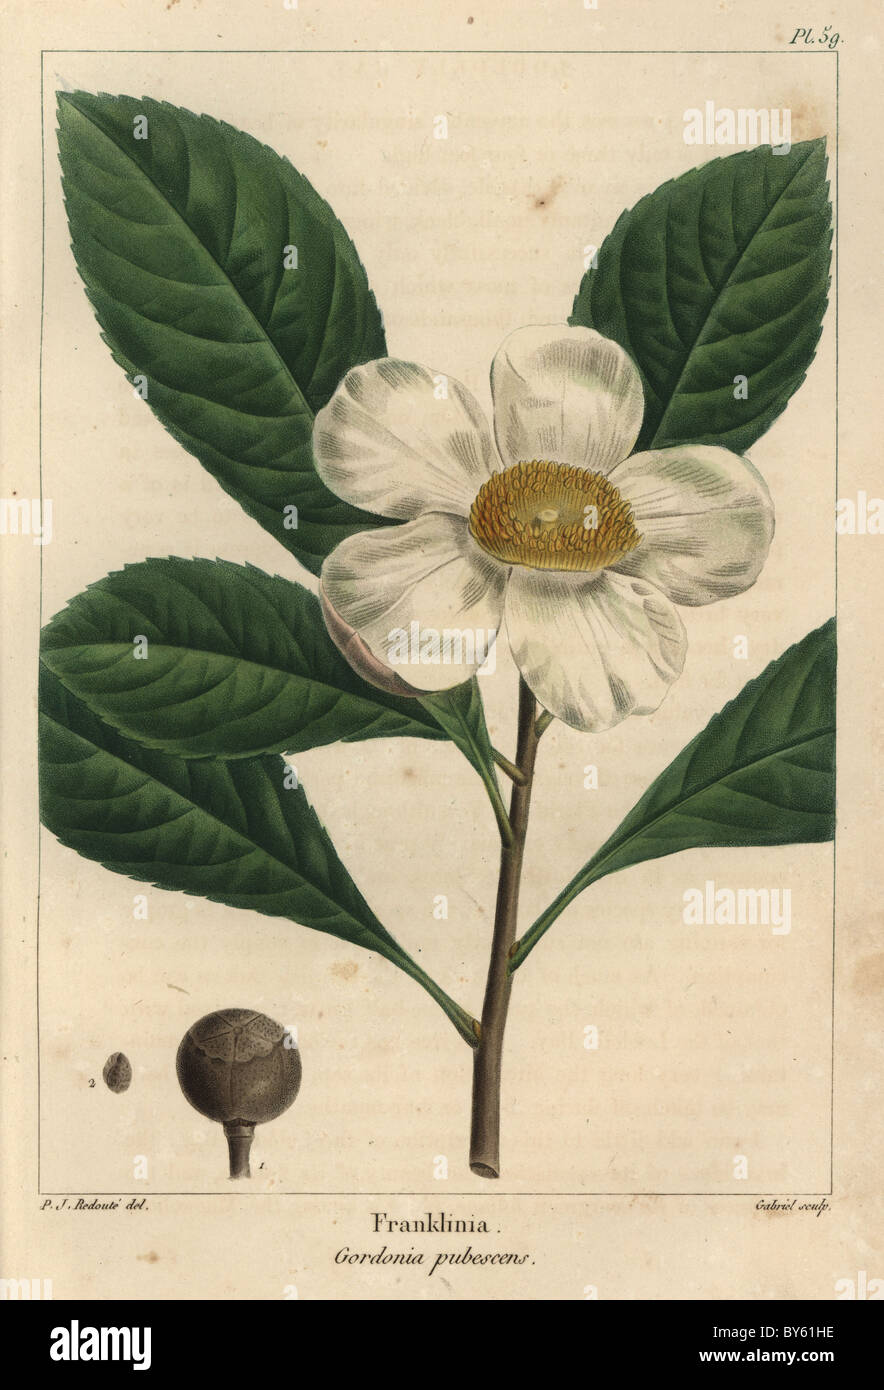 Flower, leaves, seed vessel and seed of the Franklinia tree, Gordonia pubescens. Stock Photo